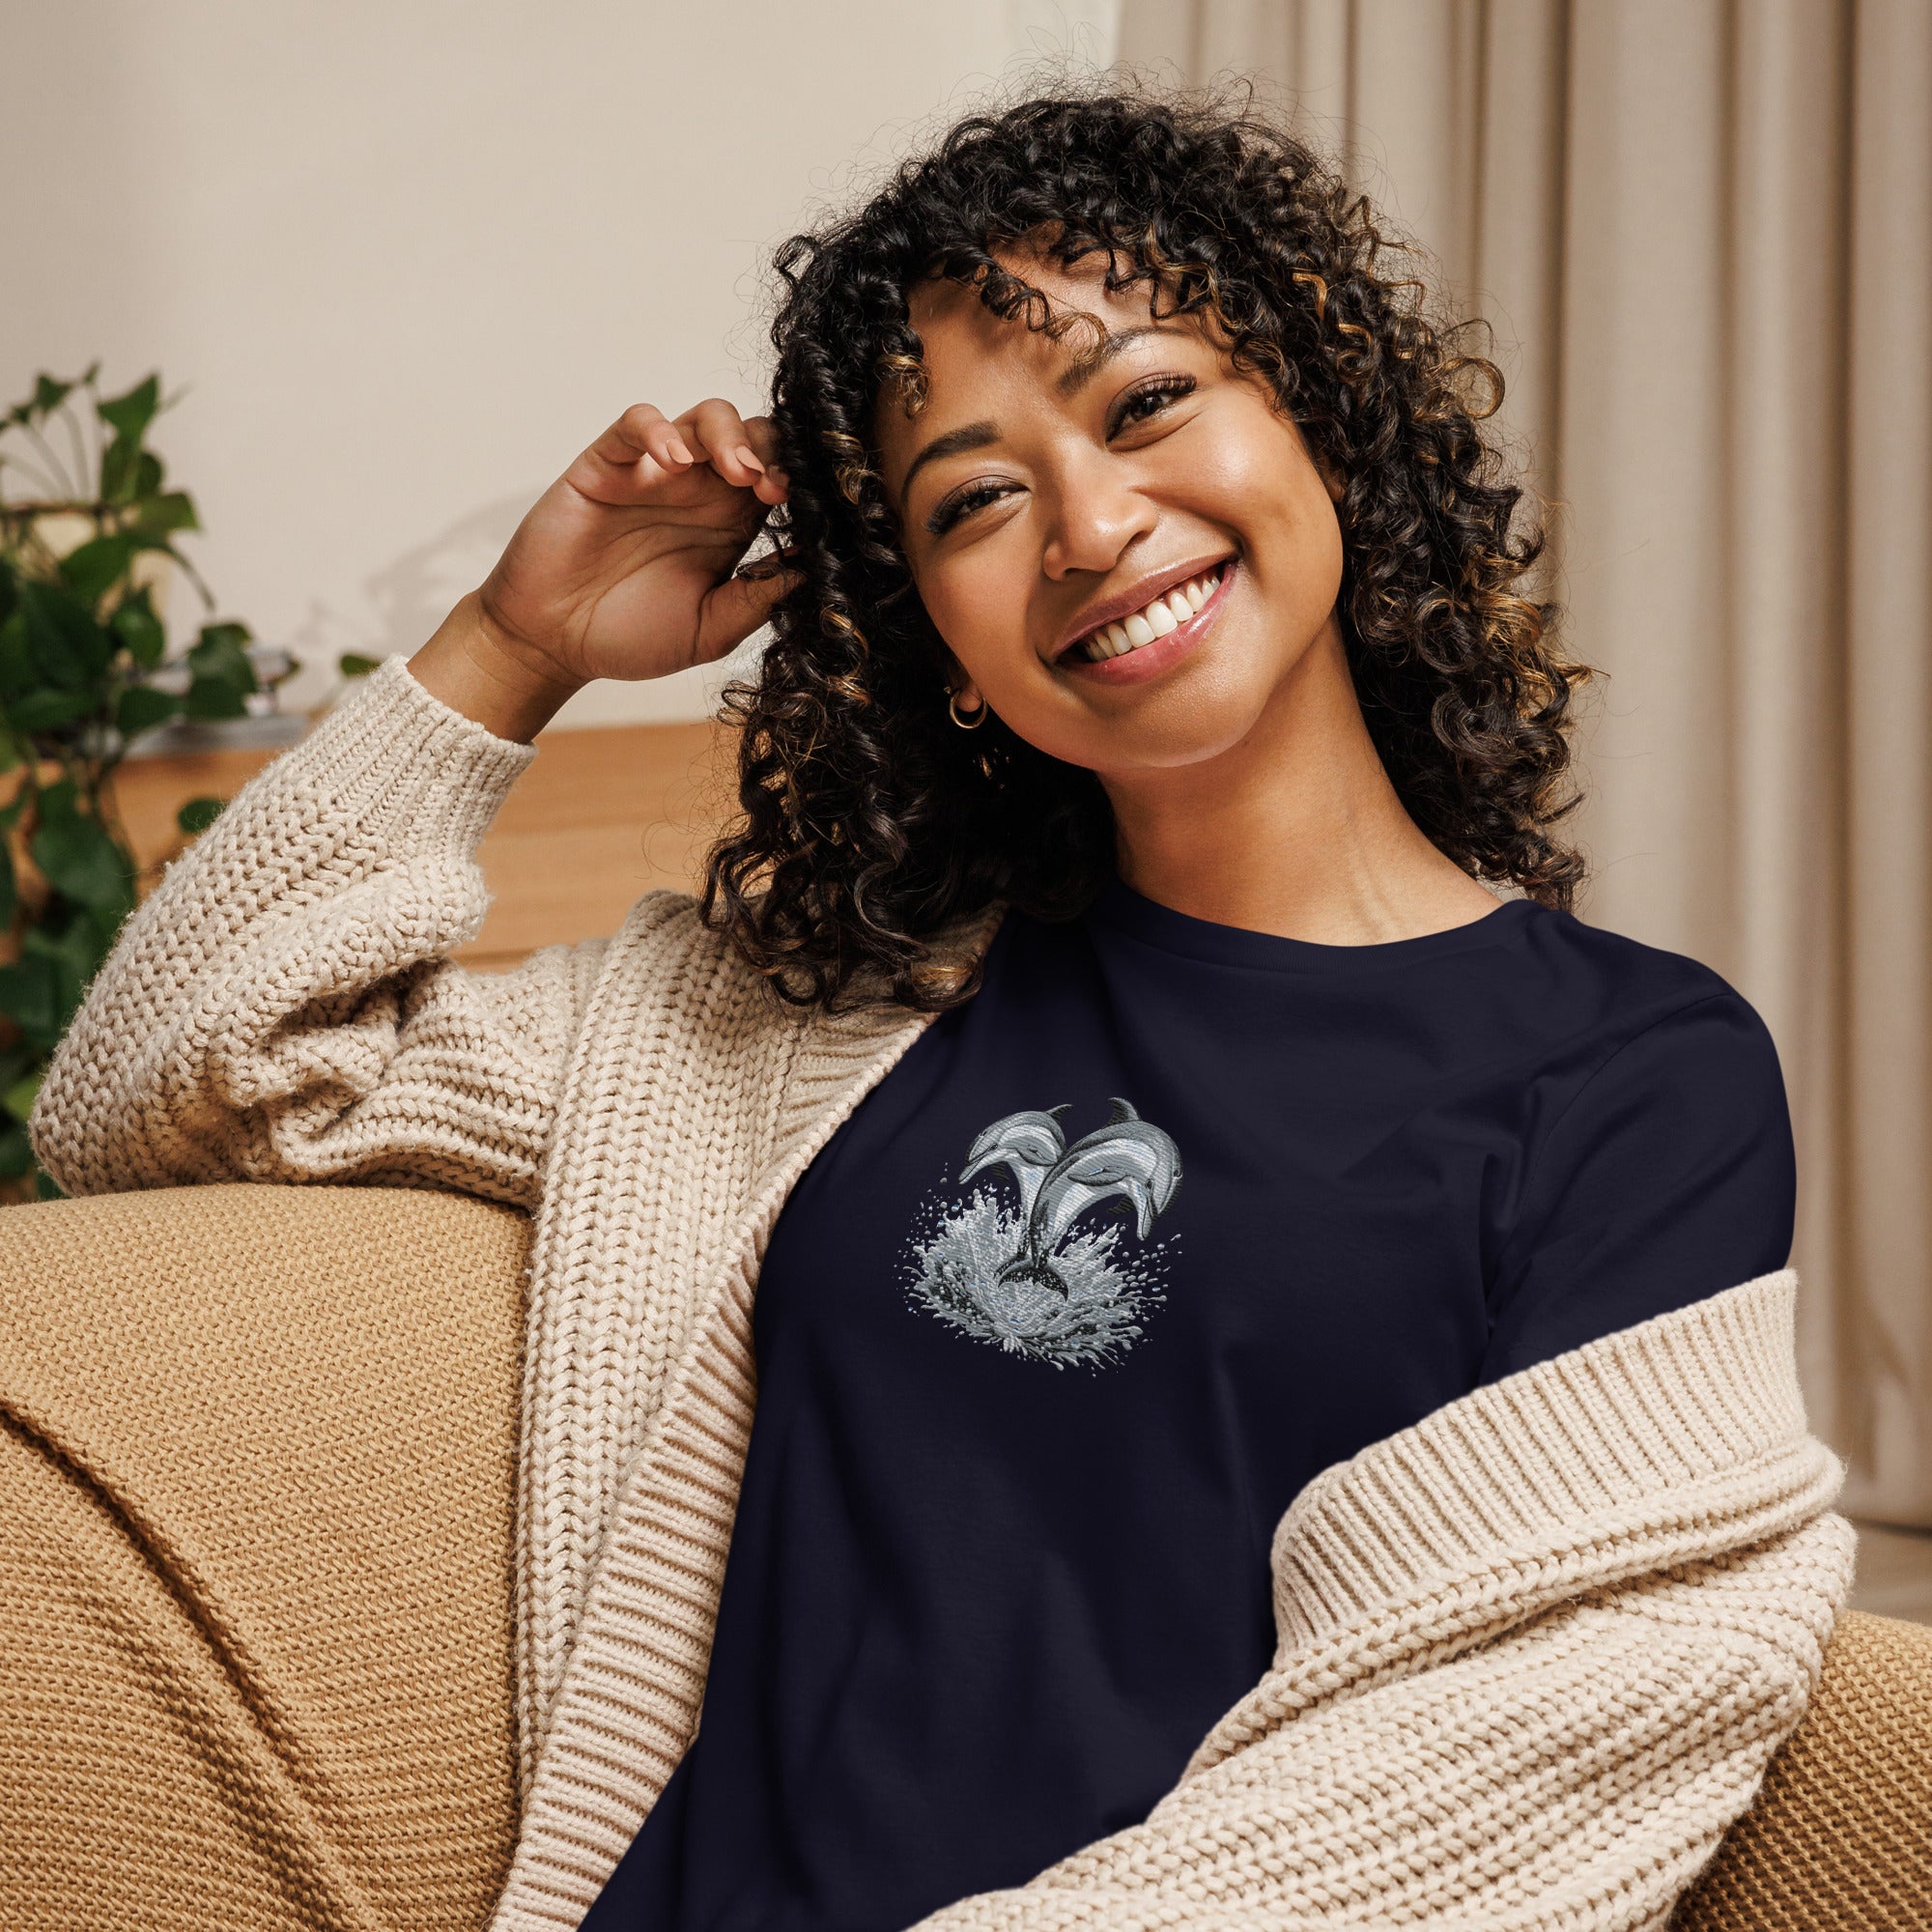 Discover Comfort and Style with Our Islander Embroidered Dolphin Pair Women's T-Shirt | Lucas Islander